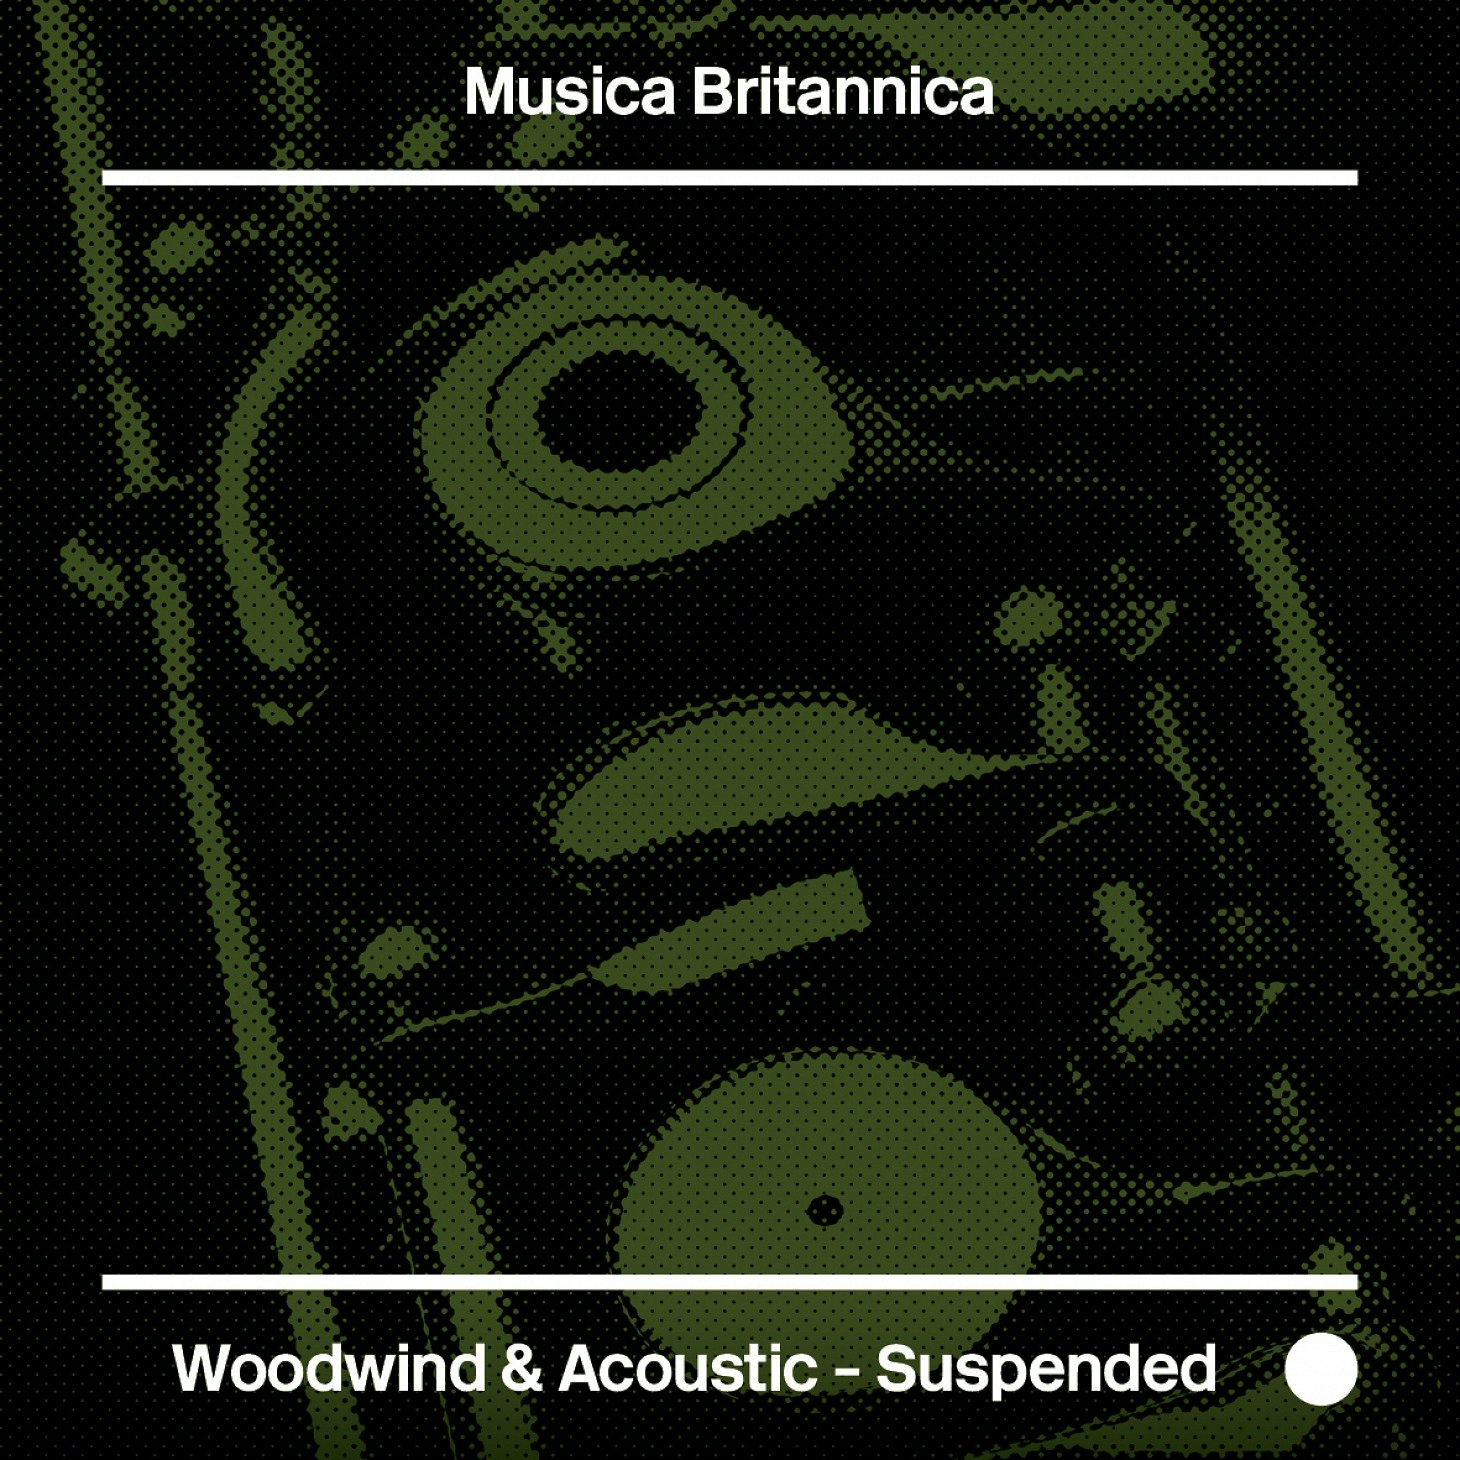 Woodwind & Acoustic - Suspended